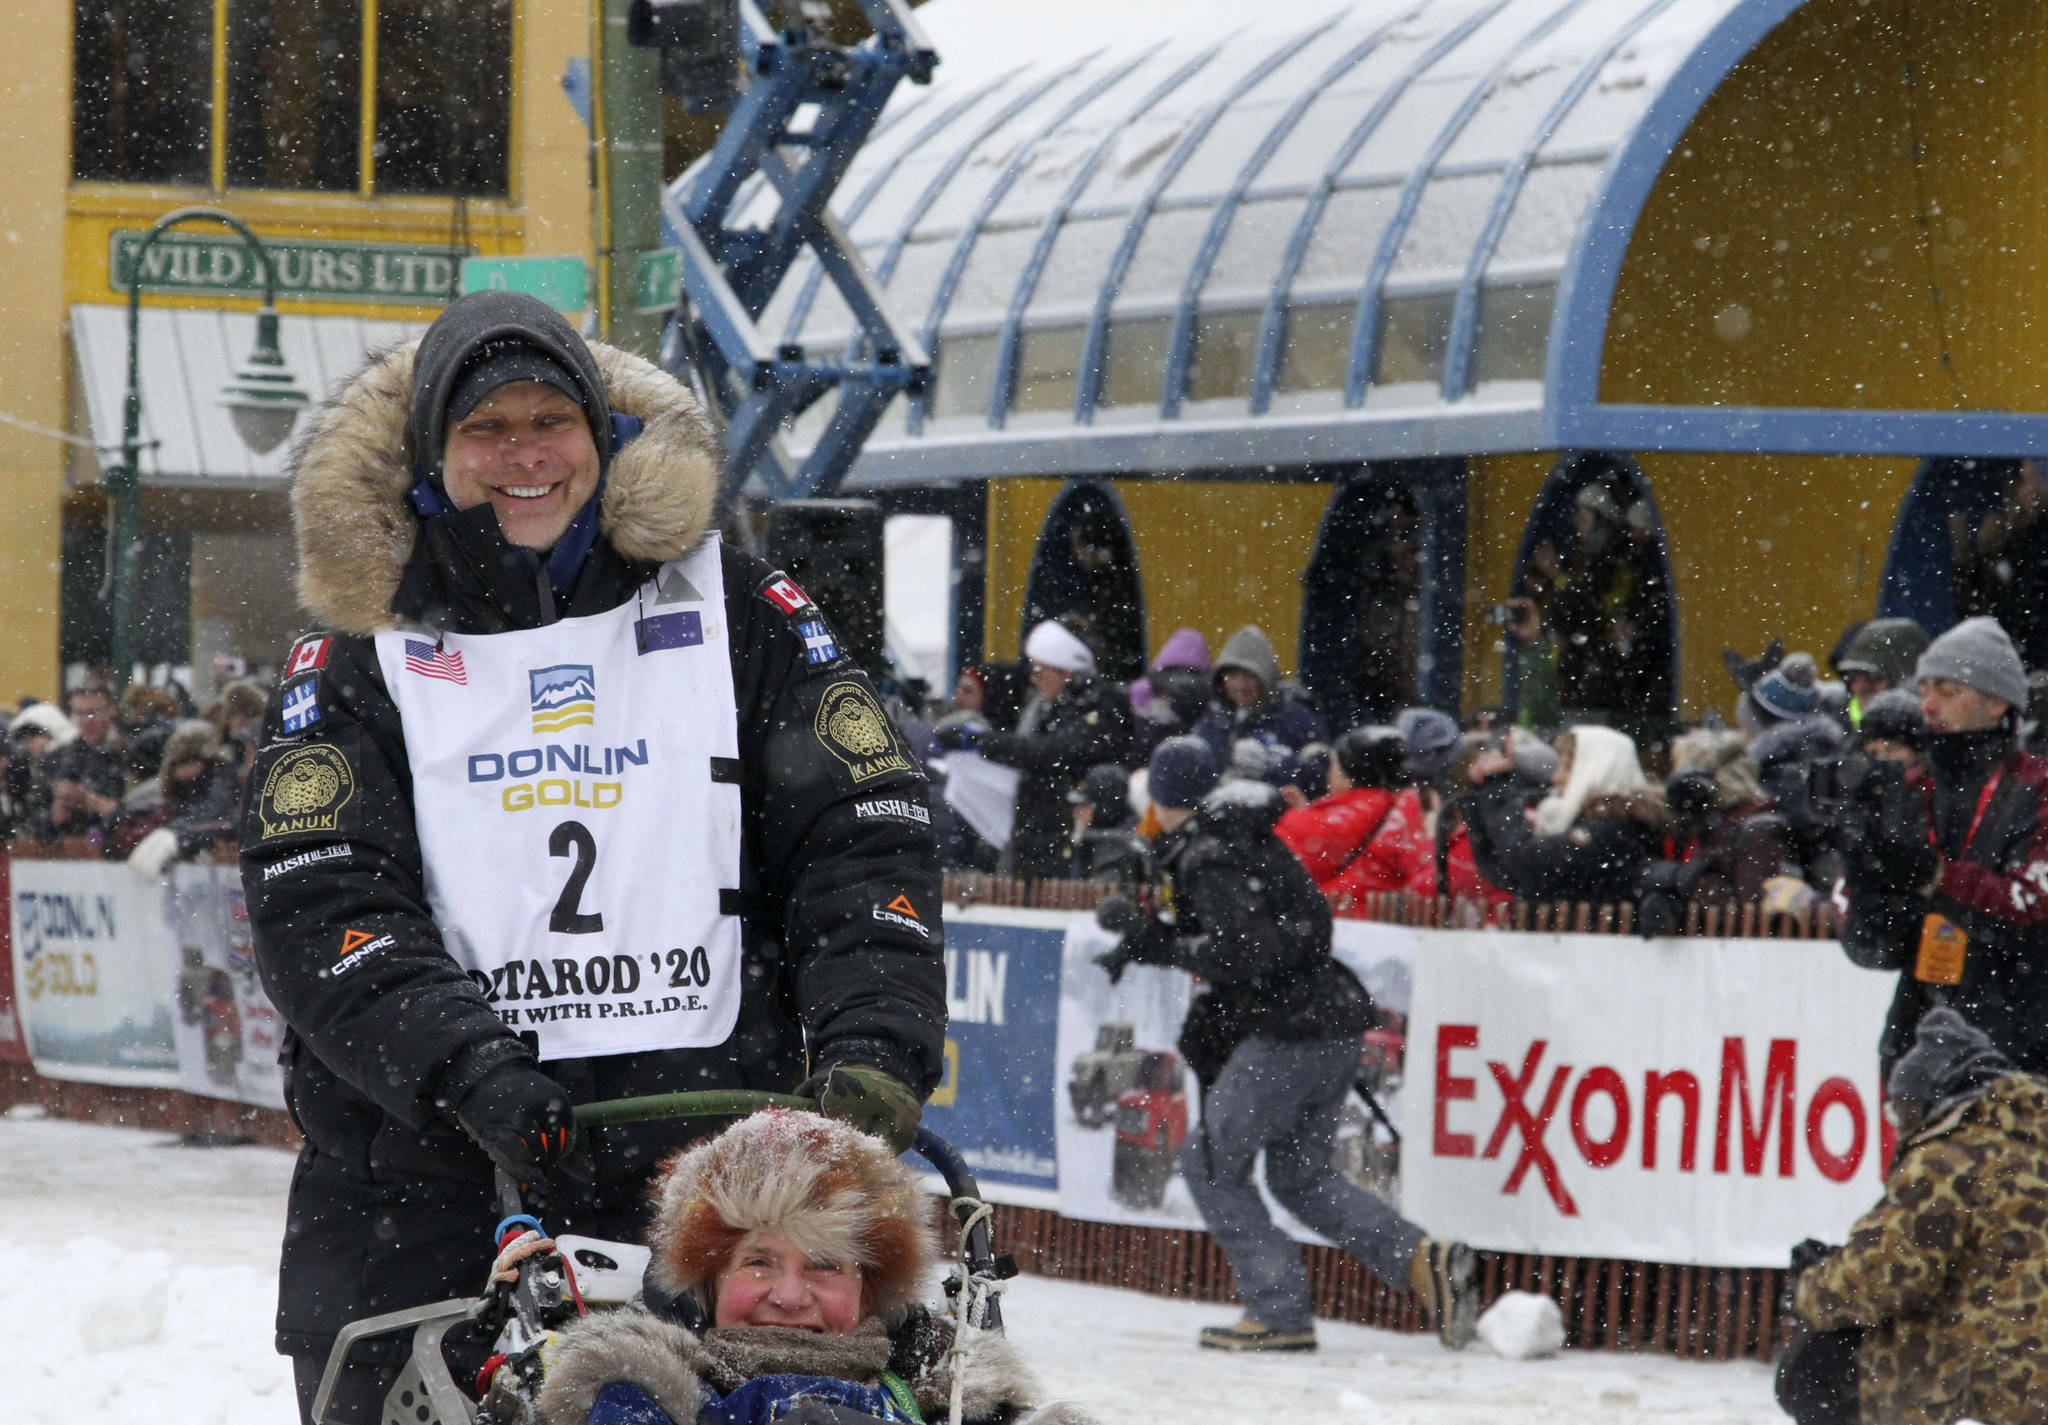 Musher Martin Massicotte of St-Tite, Quebec, Canada, leaves the start line during the ceremonial start of the Iditarod Trail Sled Dog Race Saturday, March 7, 2020, in Anchorage, Alaska. The real race starts March 8 about 50 miles north of Anchorage, with the winner expected in the Bering Sea coastal town of Nome about 10 or 11 days later. (AP Photo/Mark Thiessen)